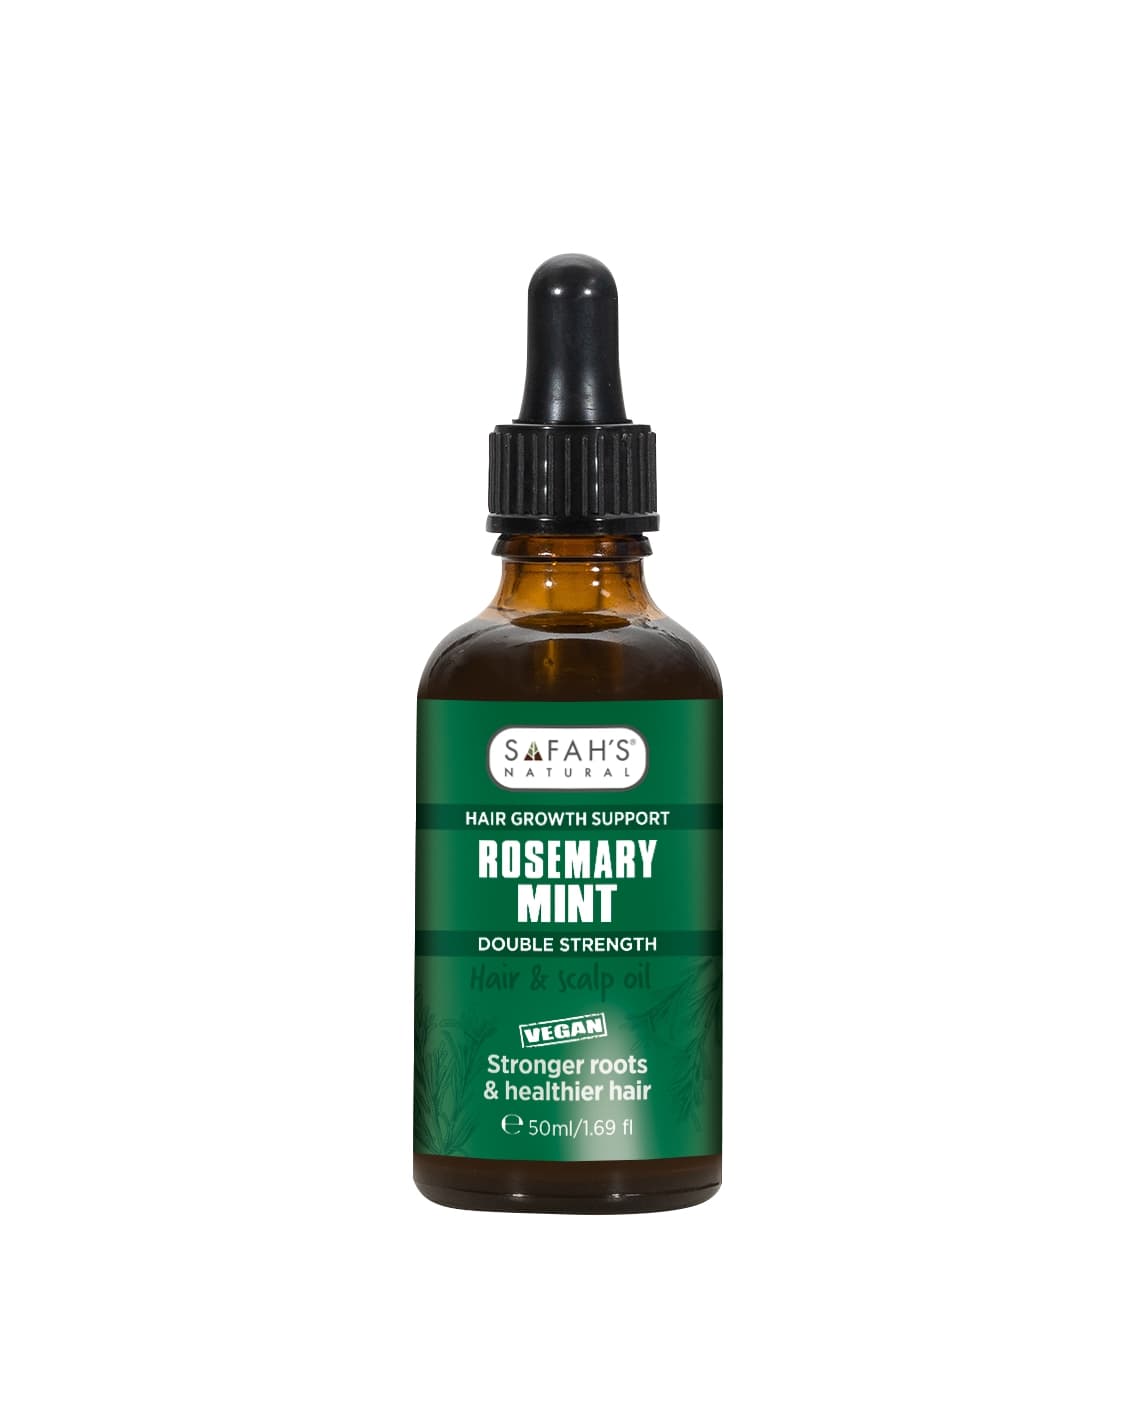 Rosemary Mint Double strength - Enhanced Aromatherapy, Skin, and Hair Benefits